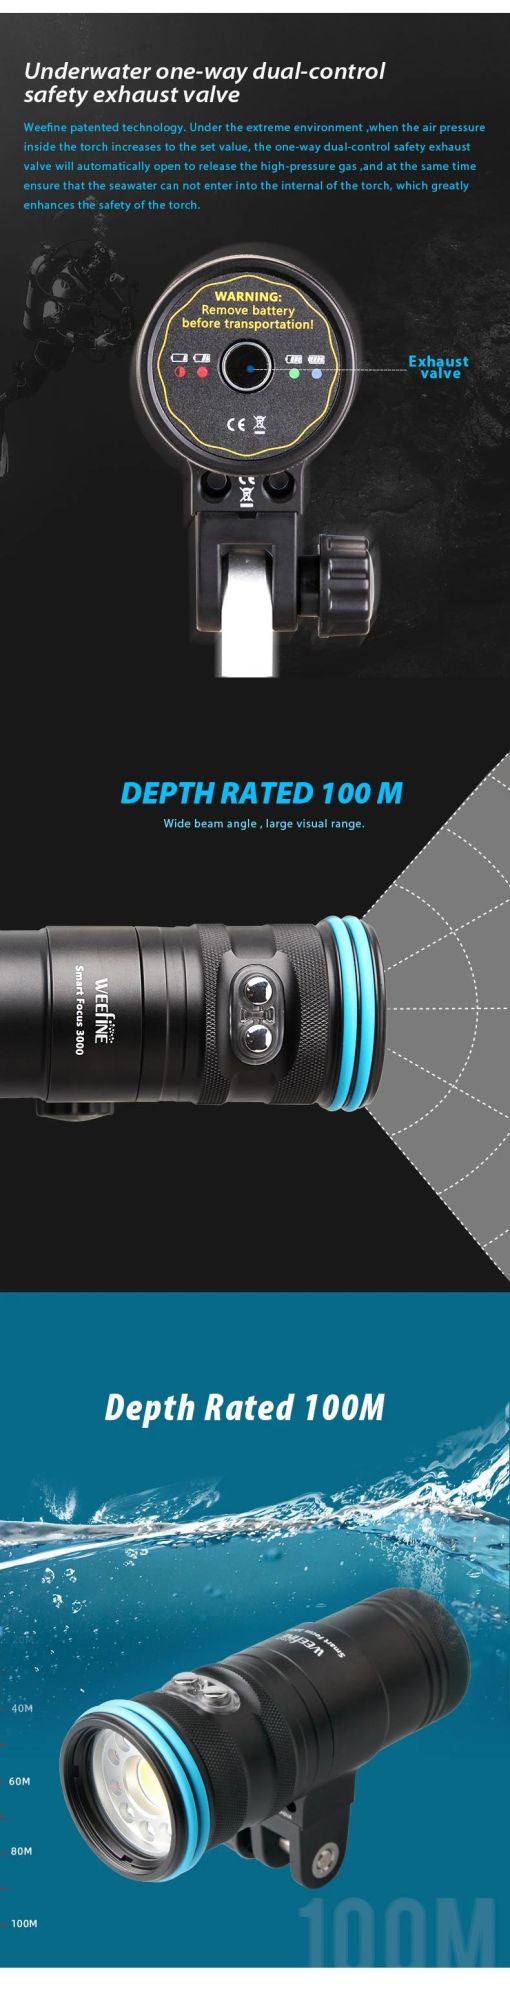 High-Quality COB LED Light Source Wide Angle Lighting Area Underwater Flashlight Lamp with Long Run Time